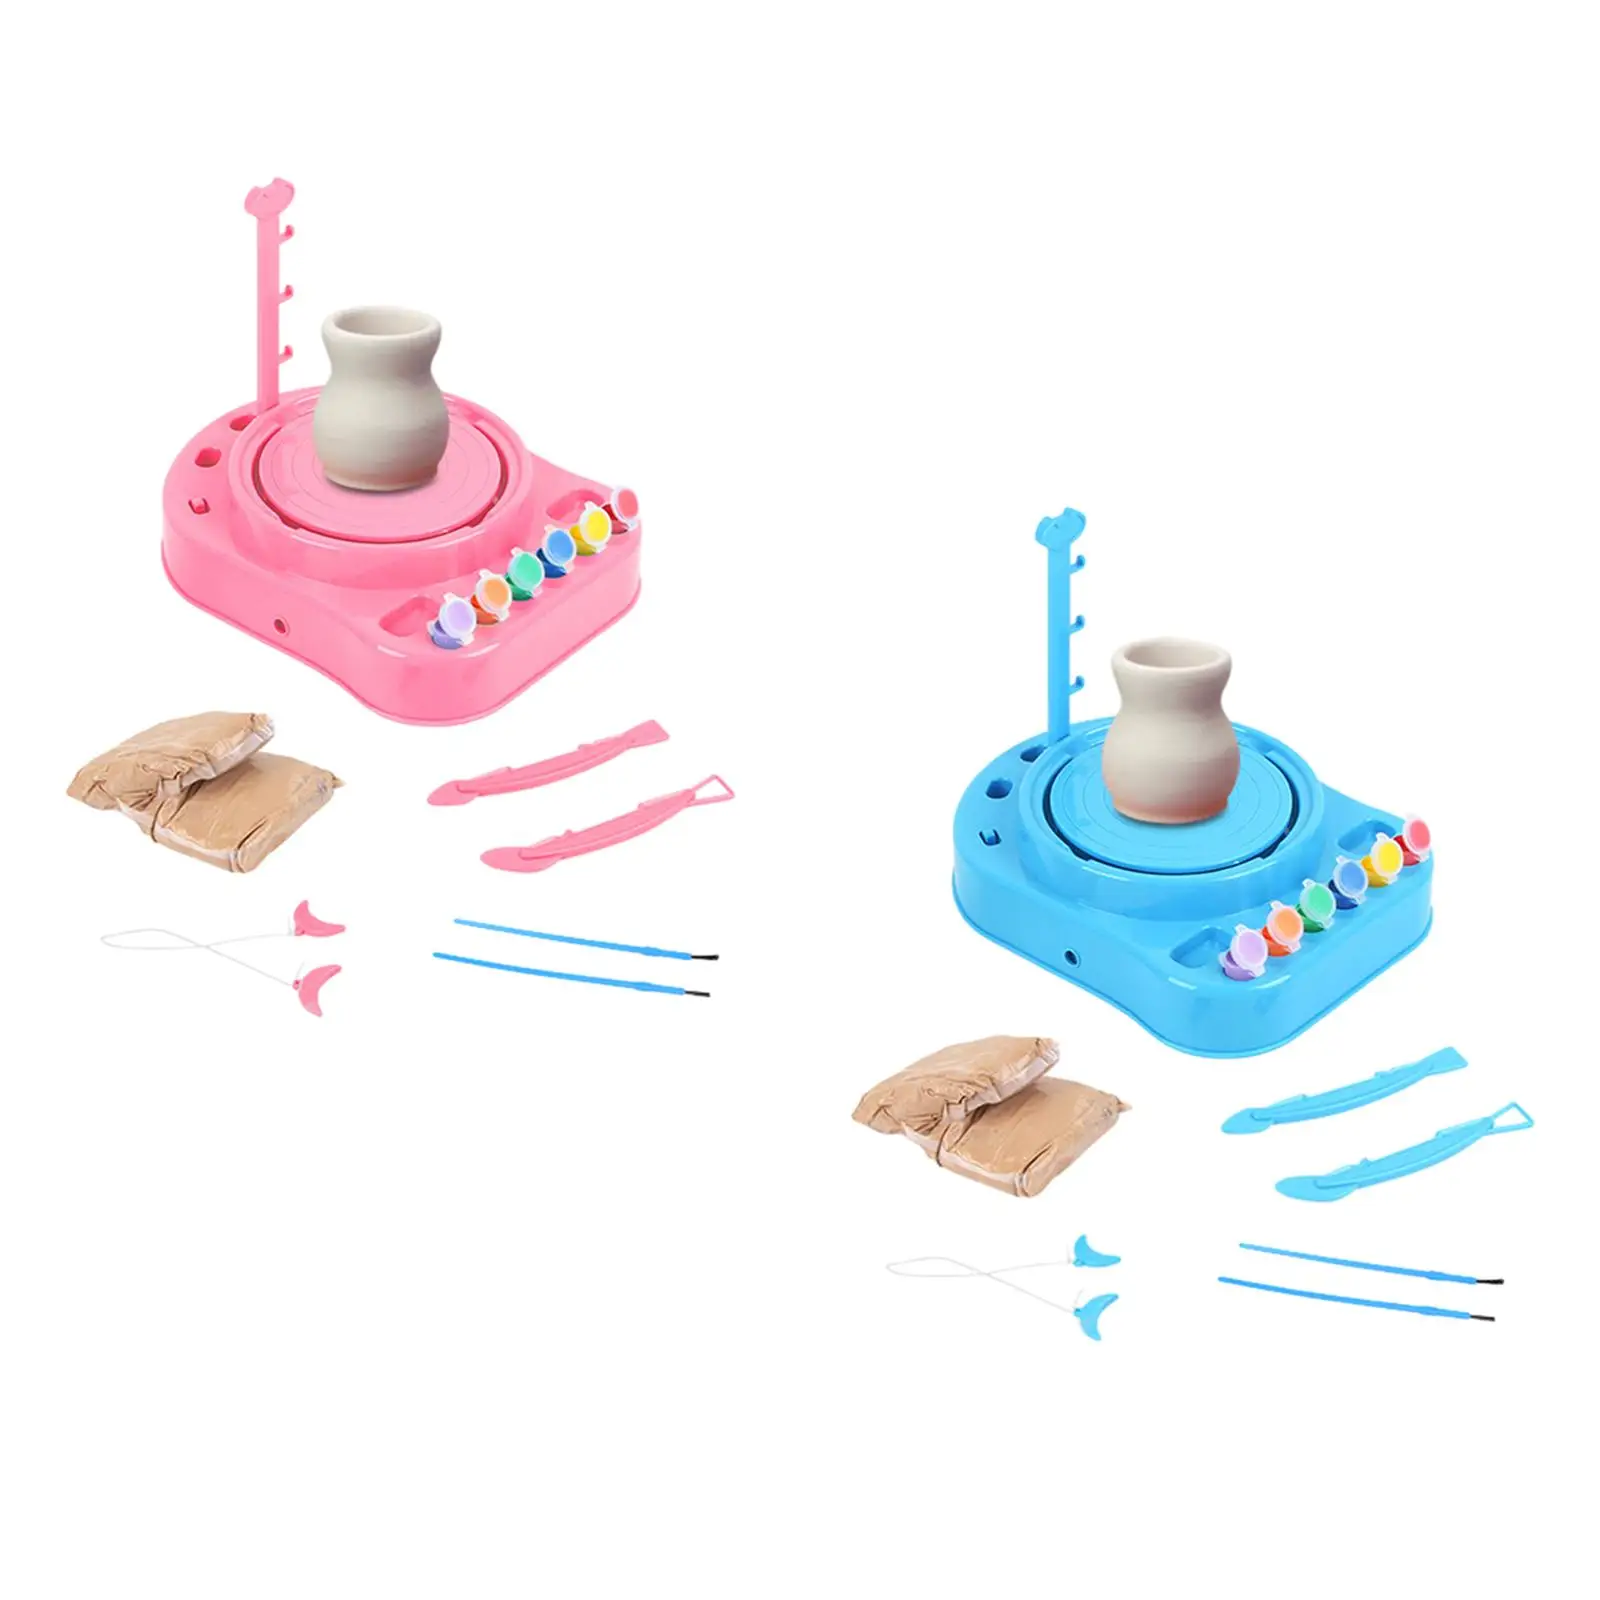 Kids Pottery Forming Machine Educational DIY Pottery Wheel for Kids for Problem Solving Coordination Fine Motor Skills Prechool